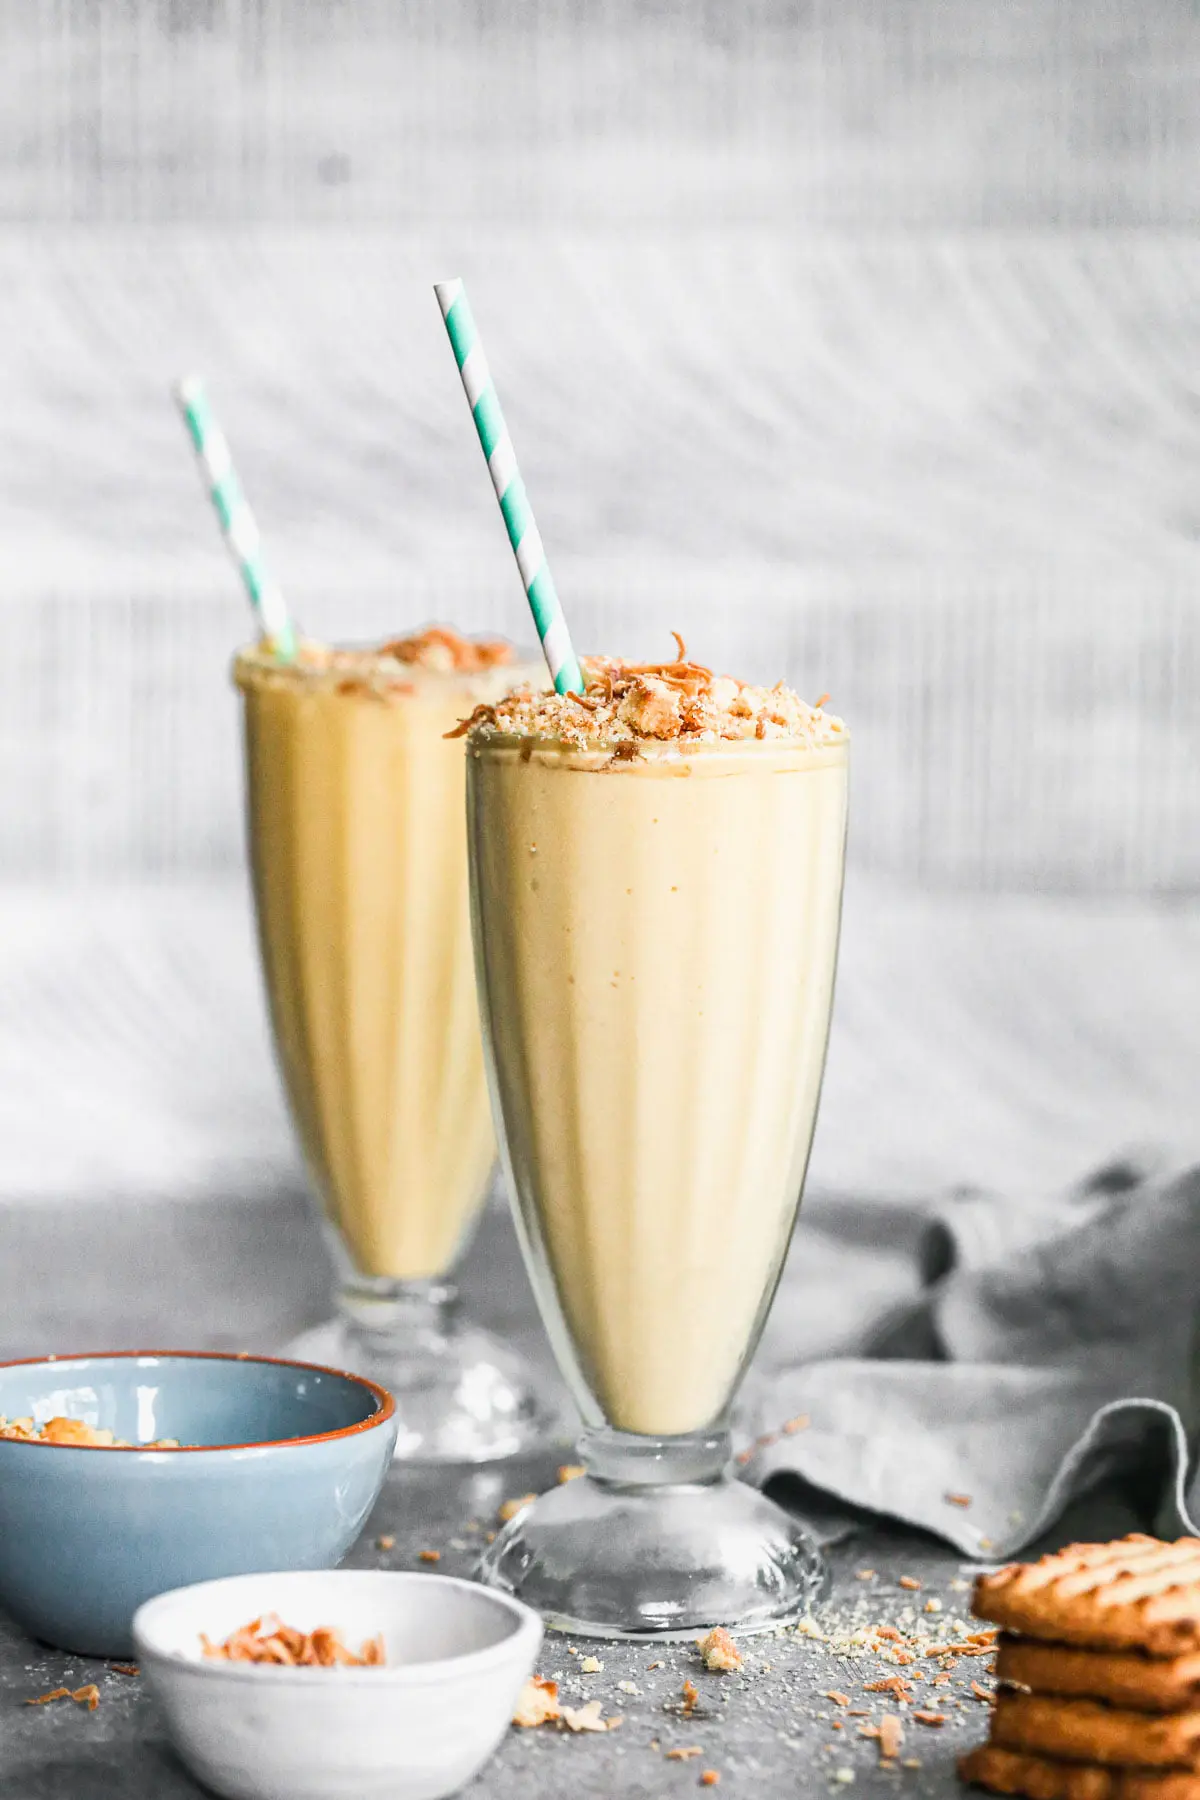 We're celebrating Oster's 75th Blending Anniversary with a Tropical Smoothie Recipe worthy of any special occasion. Filled with all your favorite tropical flavors - pineapple, mango, and coconut - this easy-to-throw-together smoothie turned dessert is irresistibly sweet, brimming with beach vibes and here to party. We top each ultra smooth, cold smoothie with toasted coconut and crushed shortbread cookies for the perfect play on texture. Don't miss this one! 